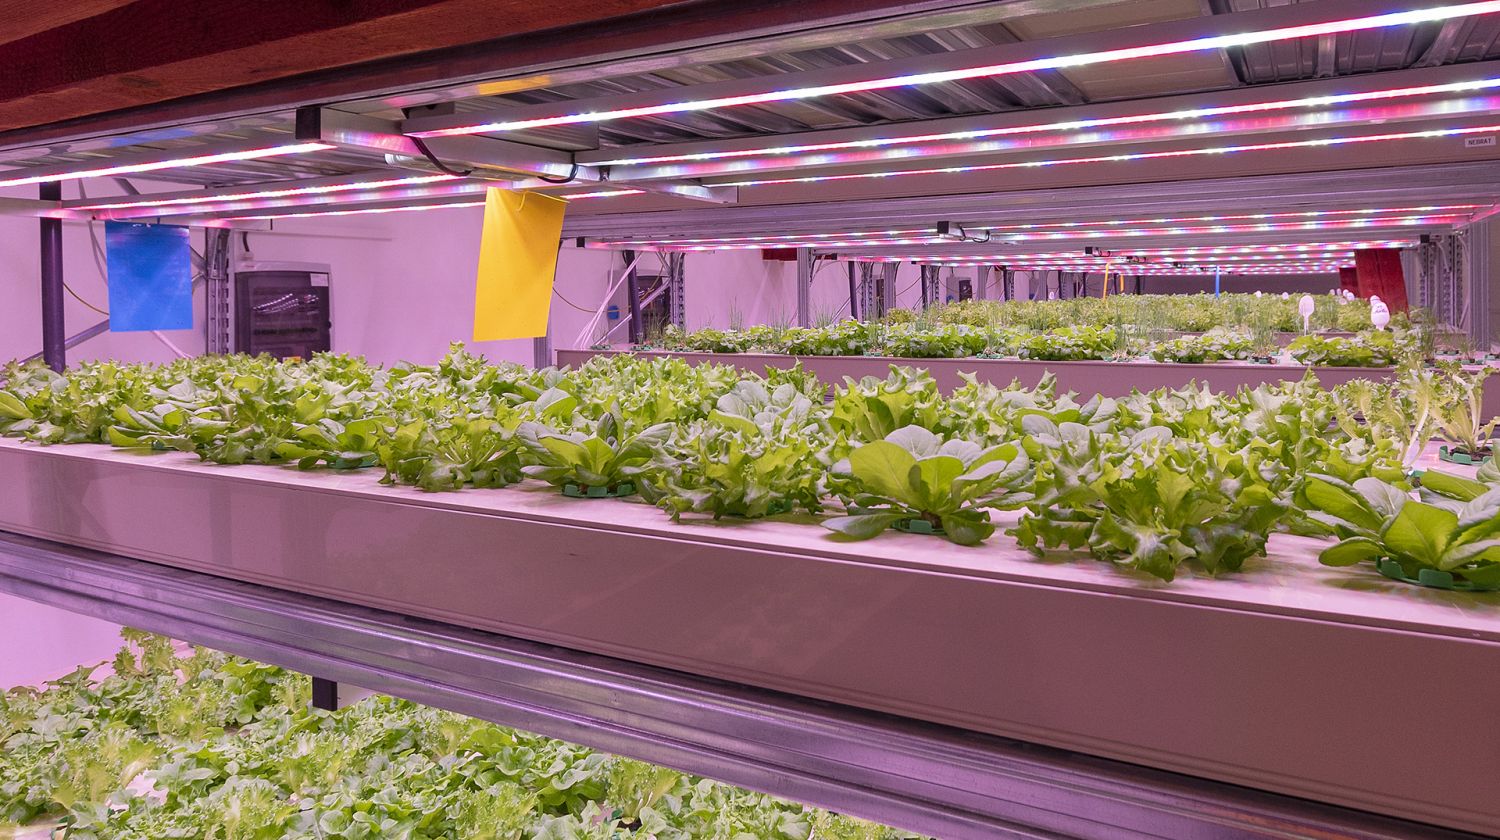 3 principles of crop protection on aquaponic farms